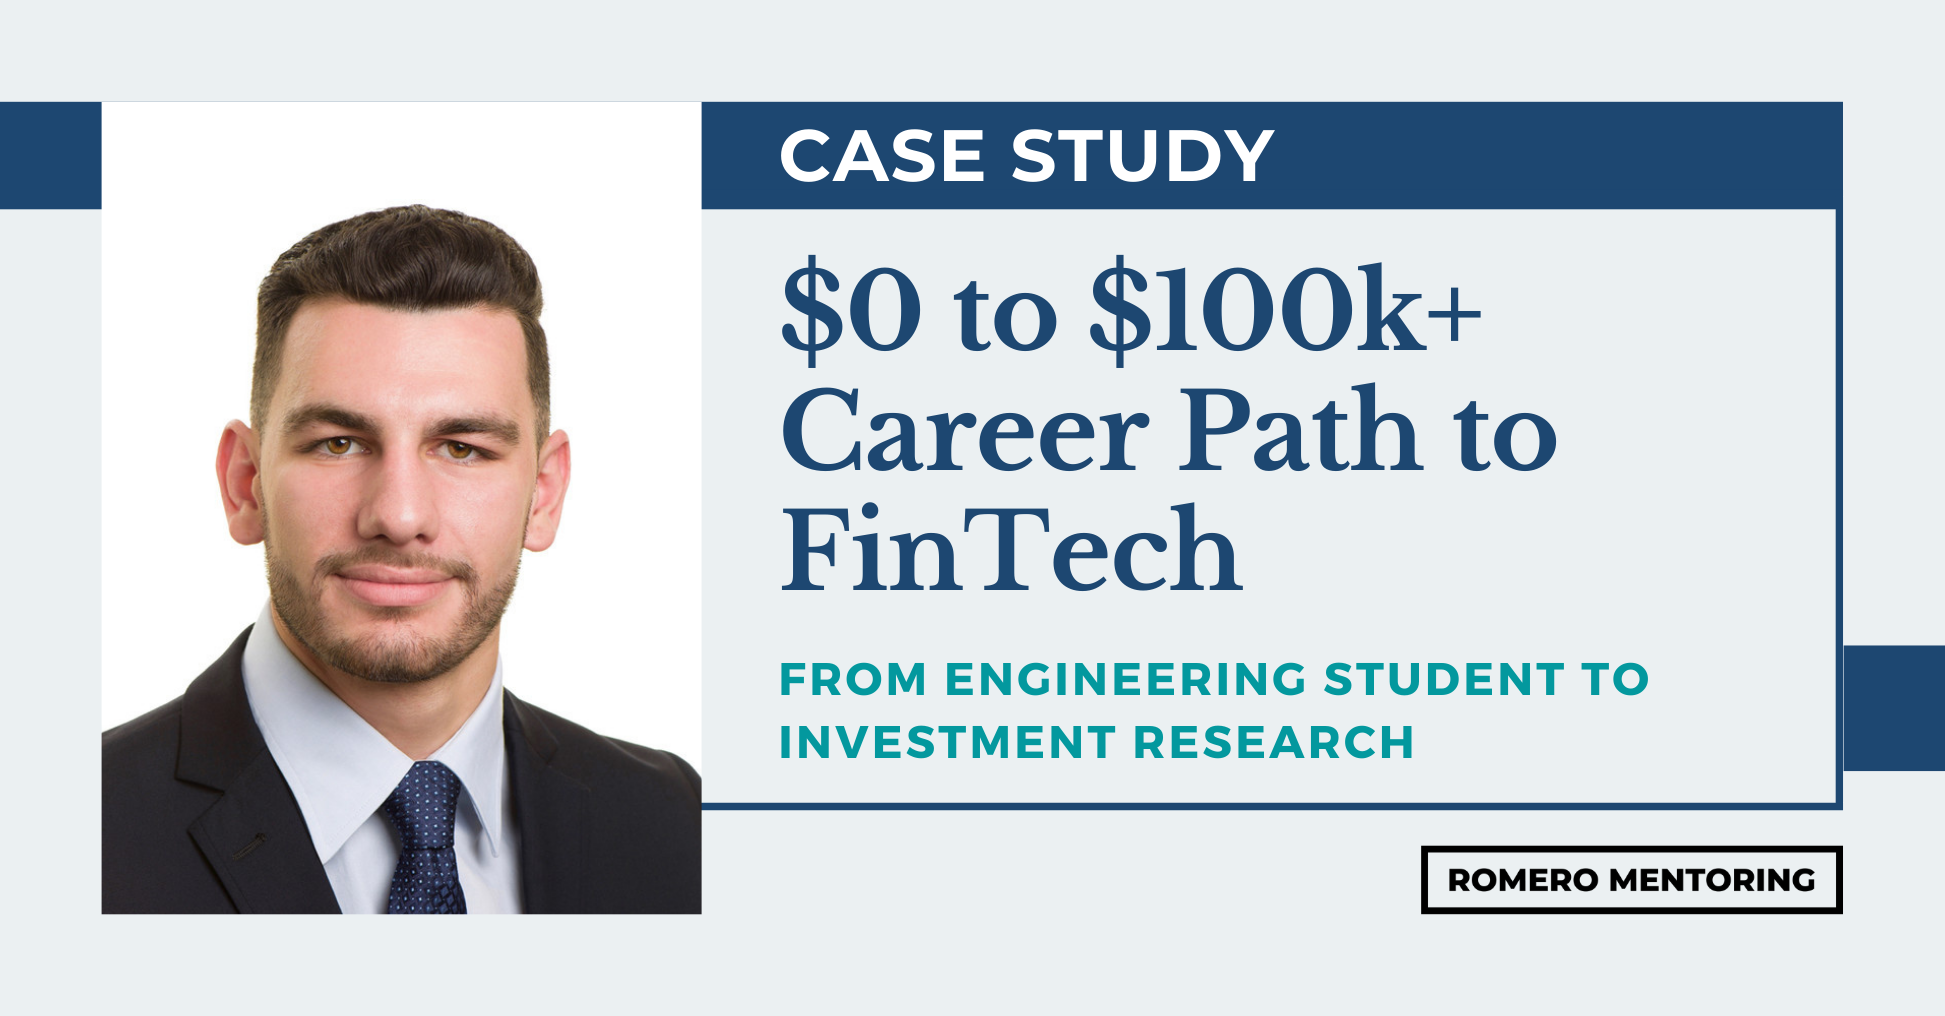 $0 to $100k+ Career Path to FinTech